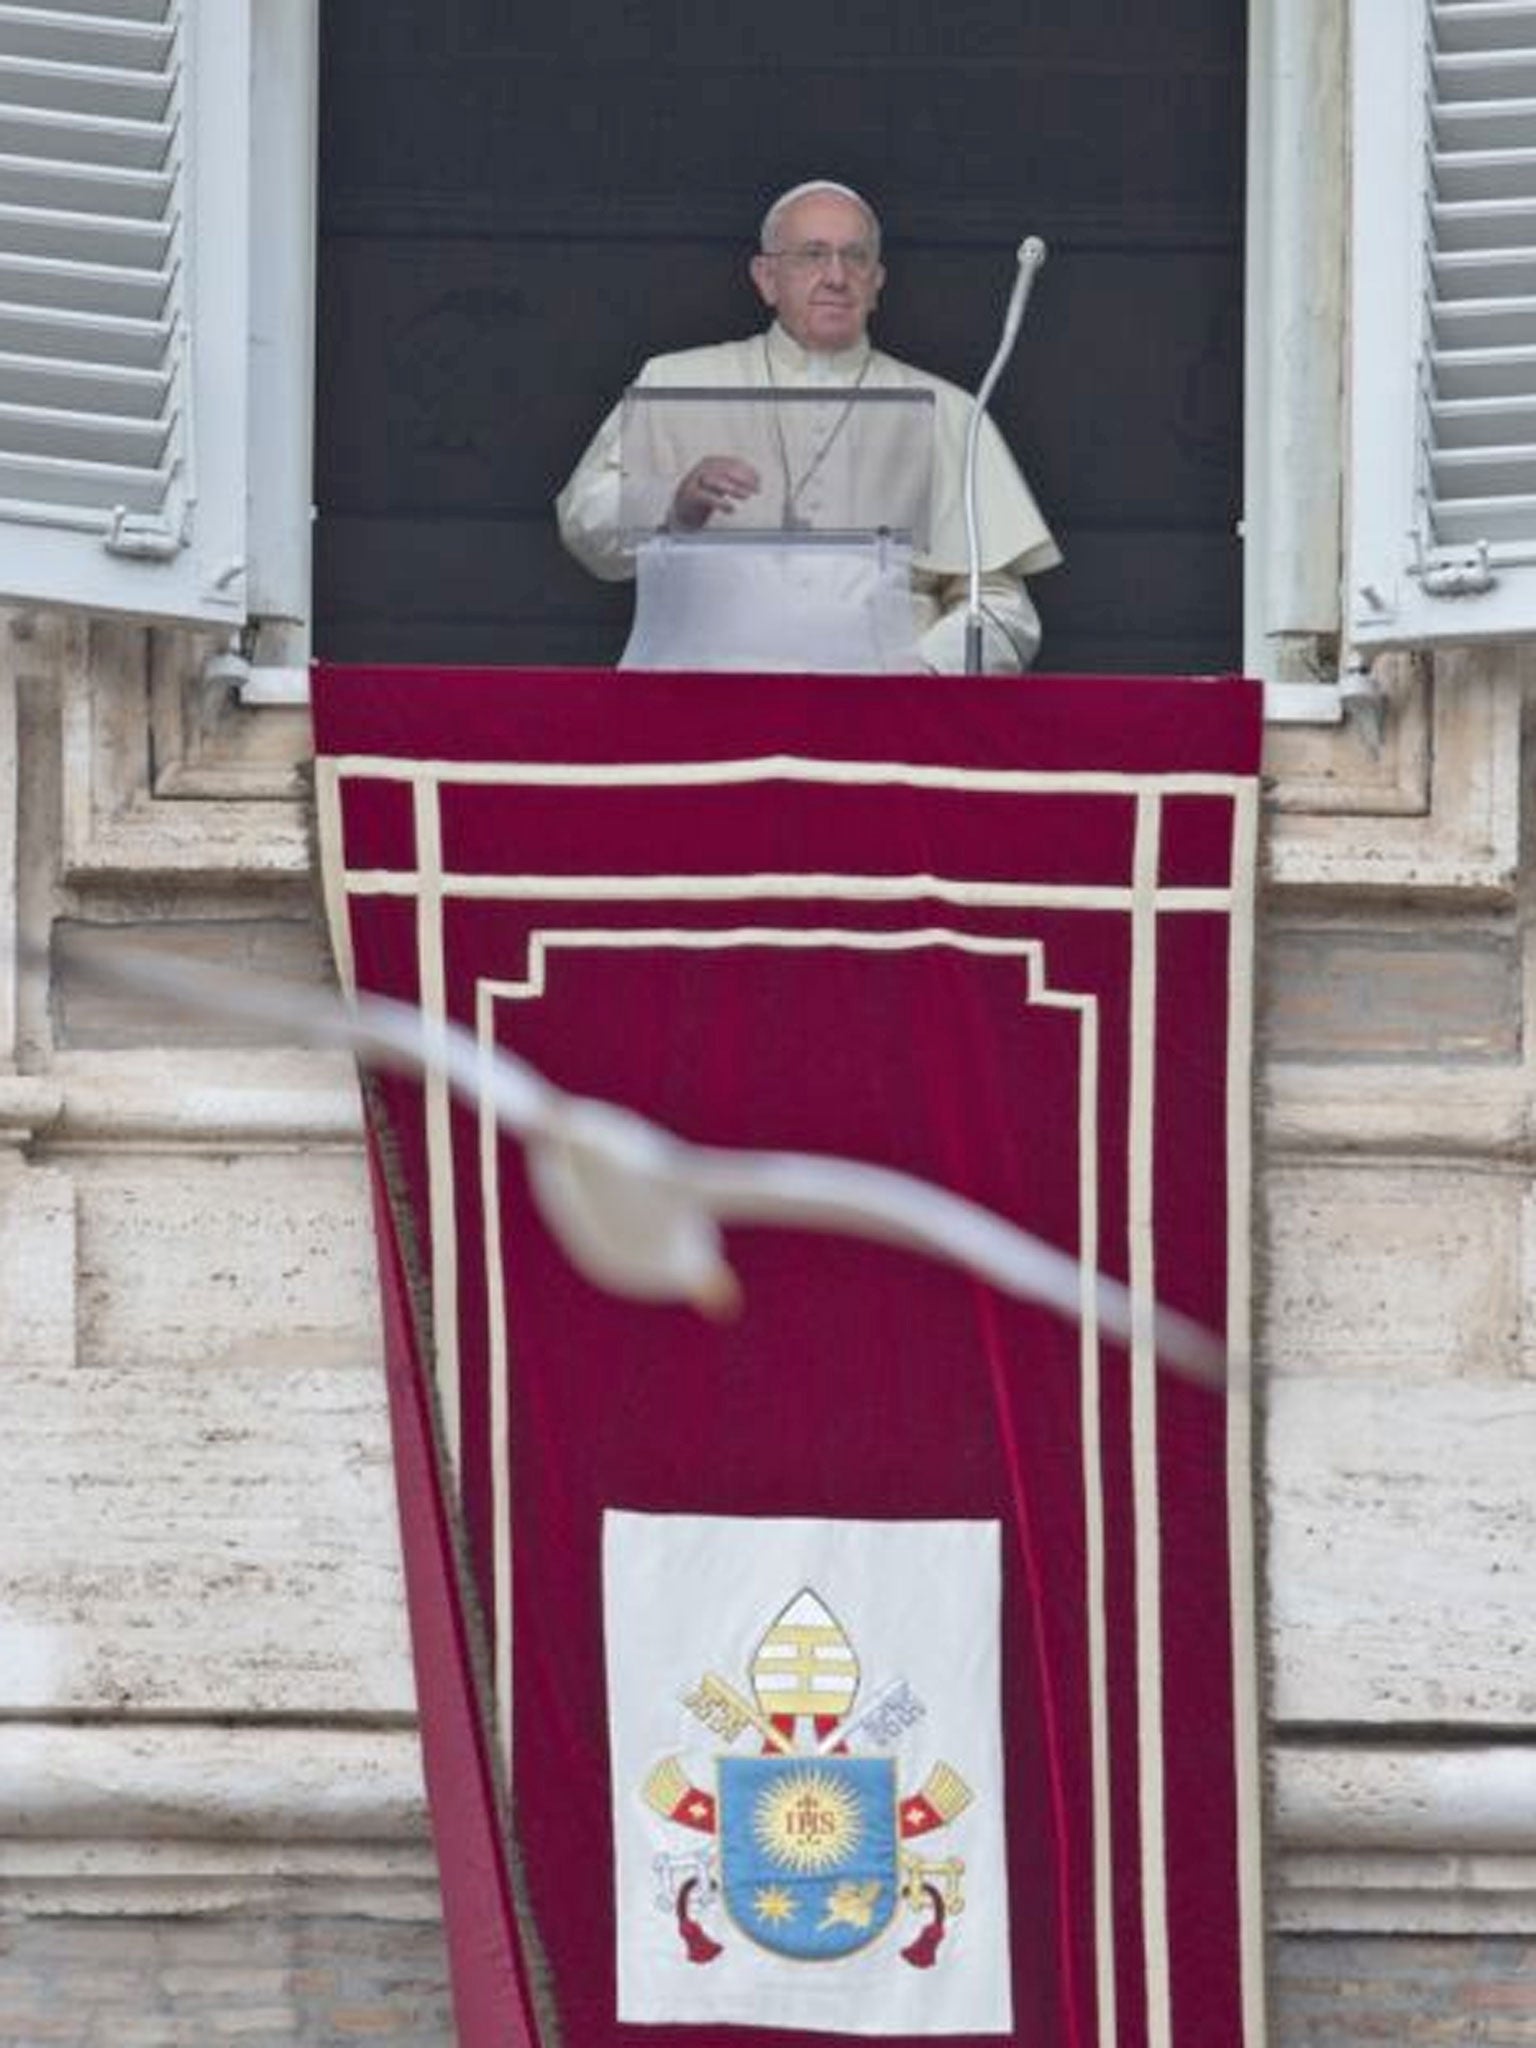 A seagull flies past pope Francis as he arrives for the Angelus noon prayer he celebrates from the window of his studio overlooking St. Peter's Square at the Vatican on Sunday 5 January